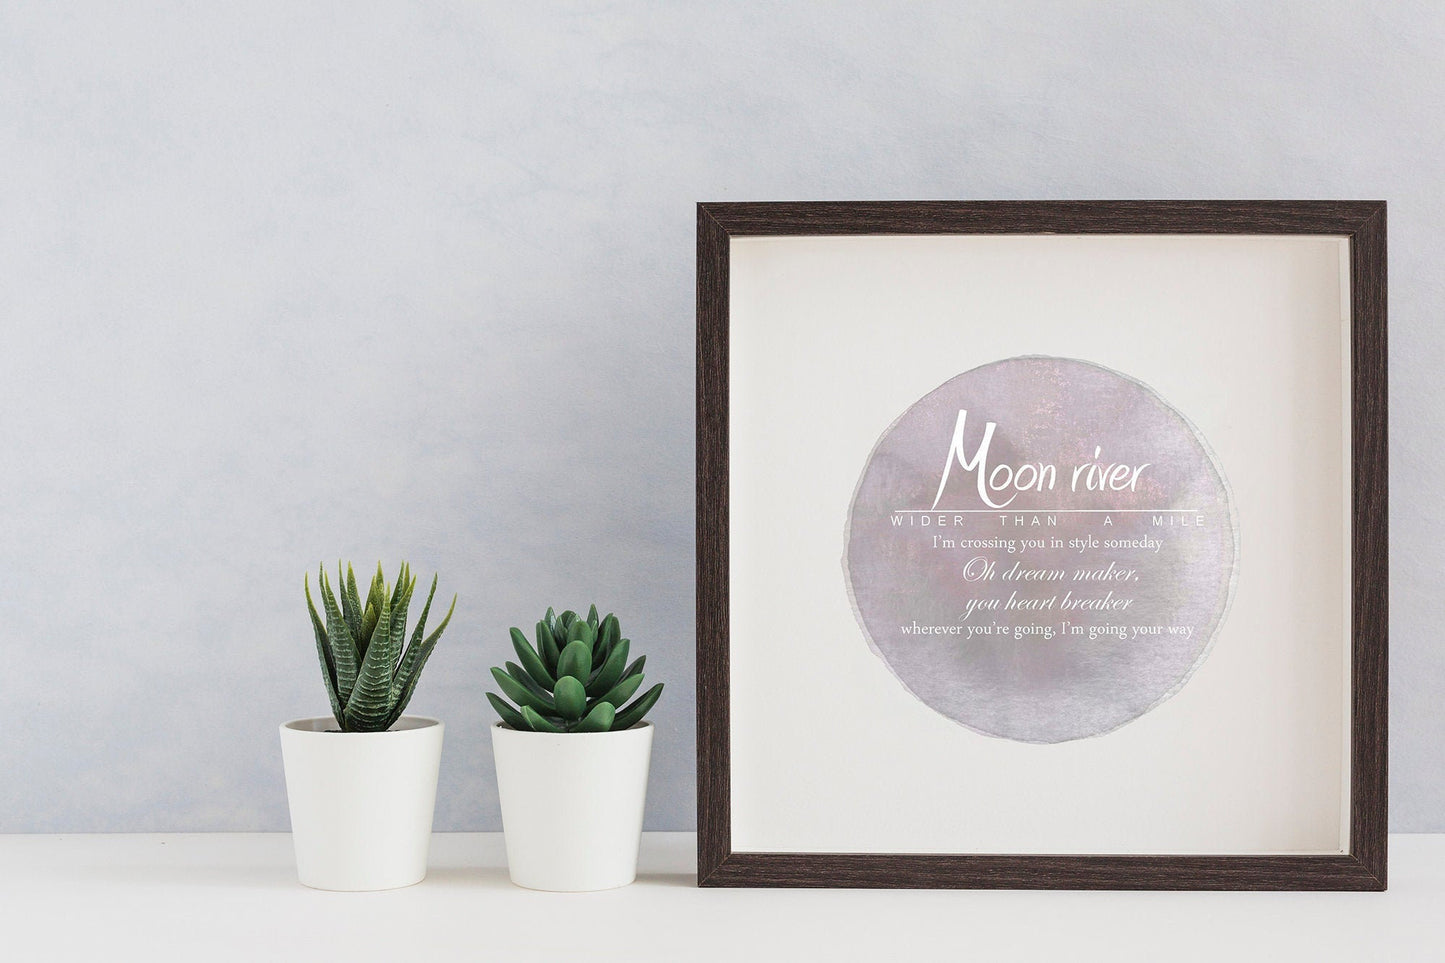 Moon River wider than a mile - song lyrics featured on moon illustration